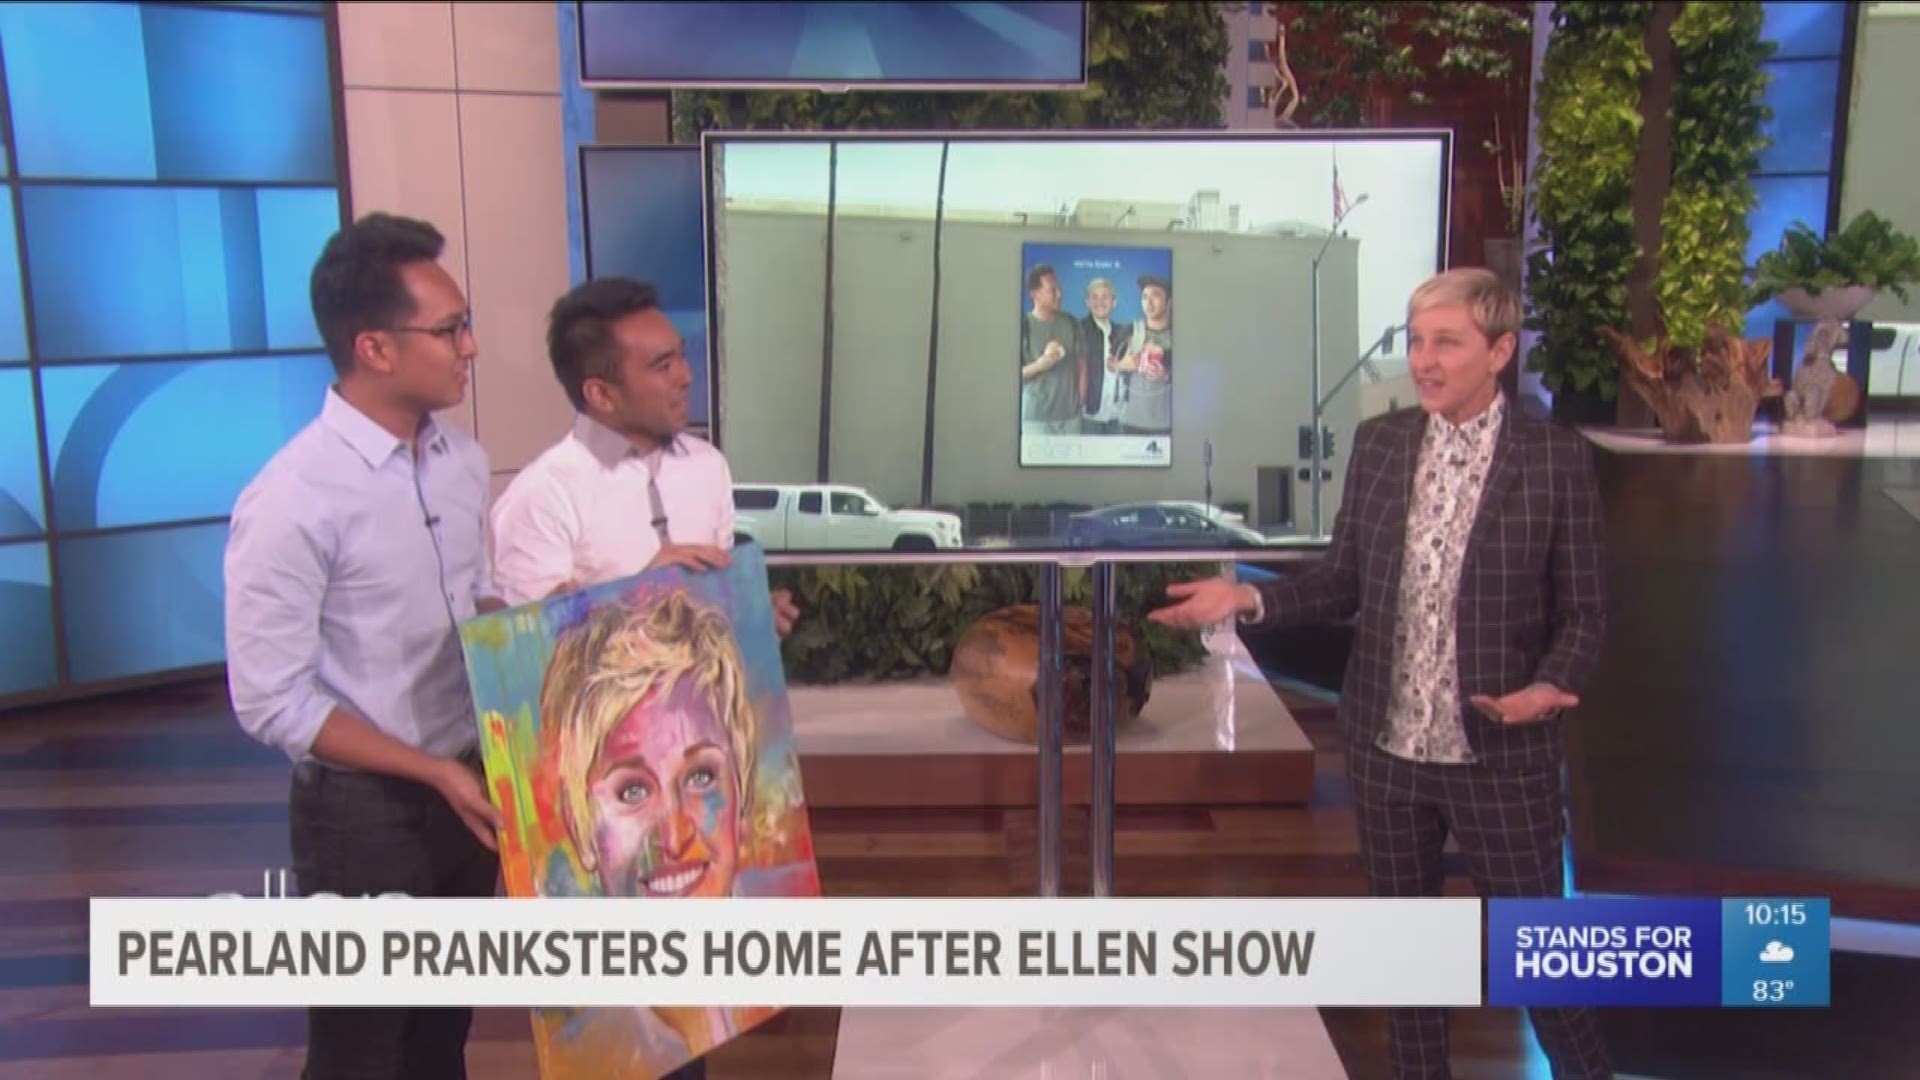 Jevh Maravilla and Christian Toledo made national headlines after KHOU 11 first reported on the prank in early September. They put up a fake marketing poster of themselves in the fast-food restaurant back in July and no one noticed.

So Ellen DeGeneres su